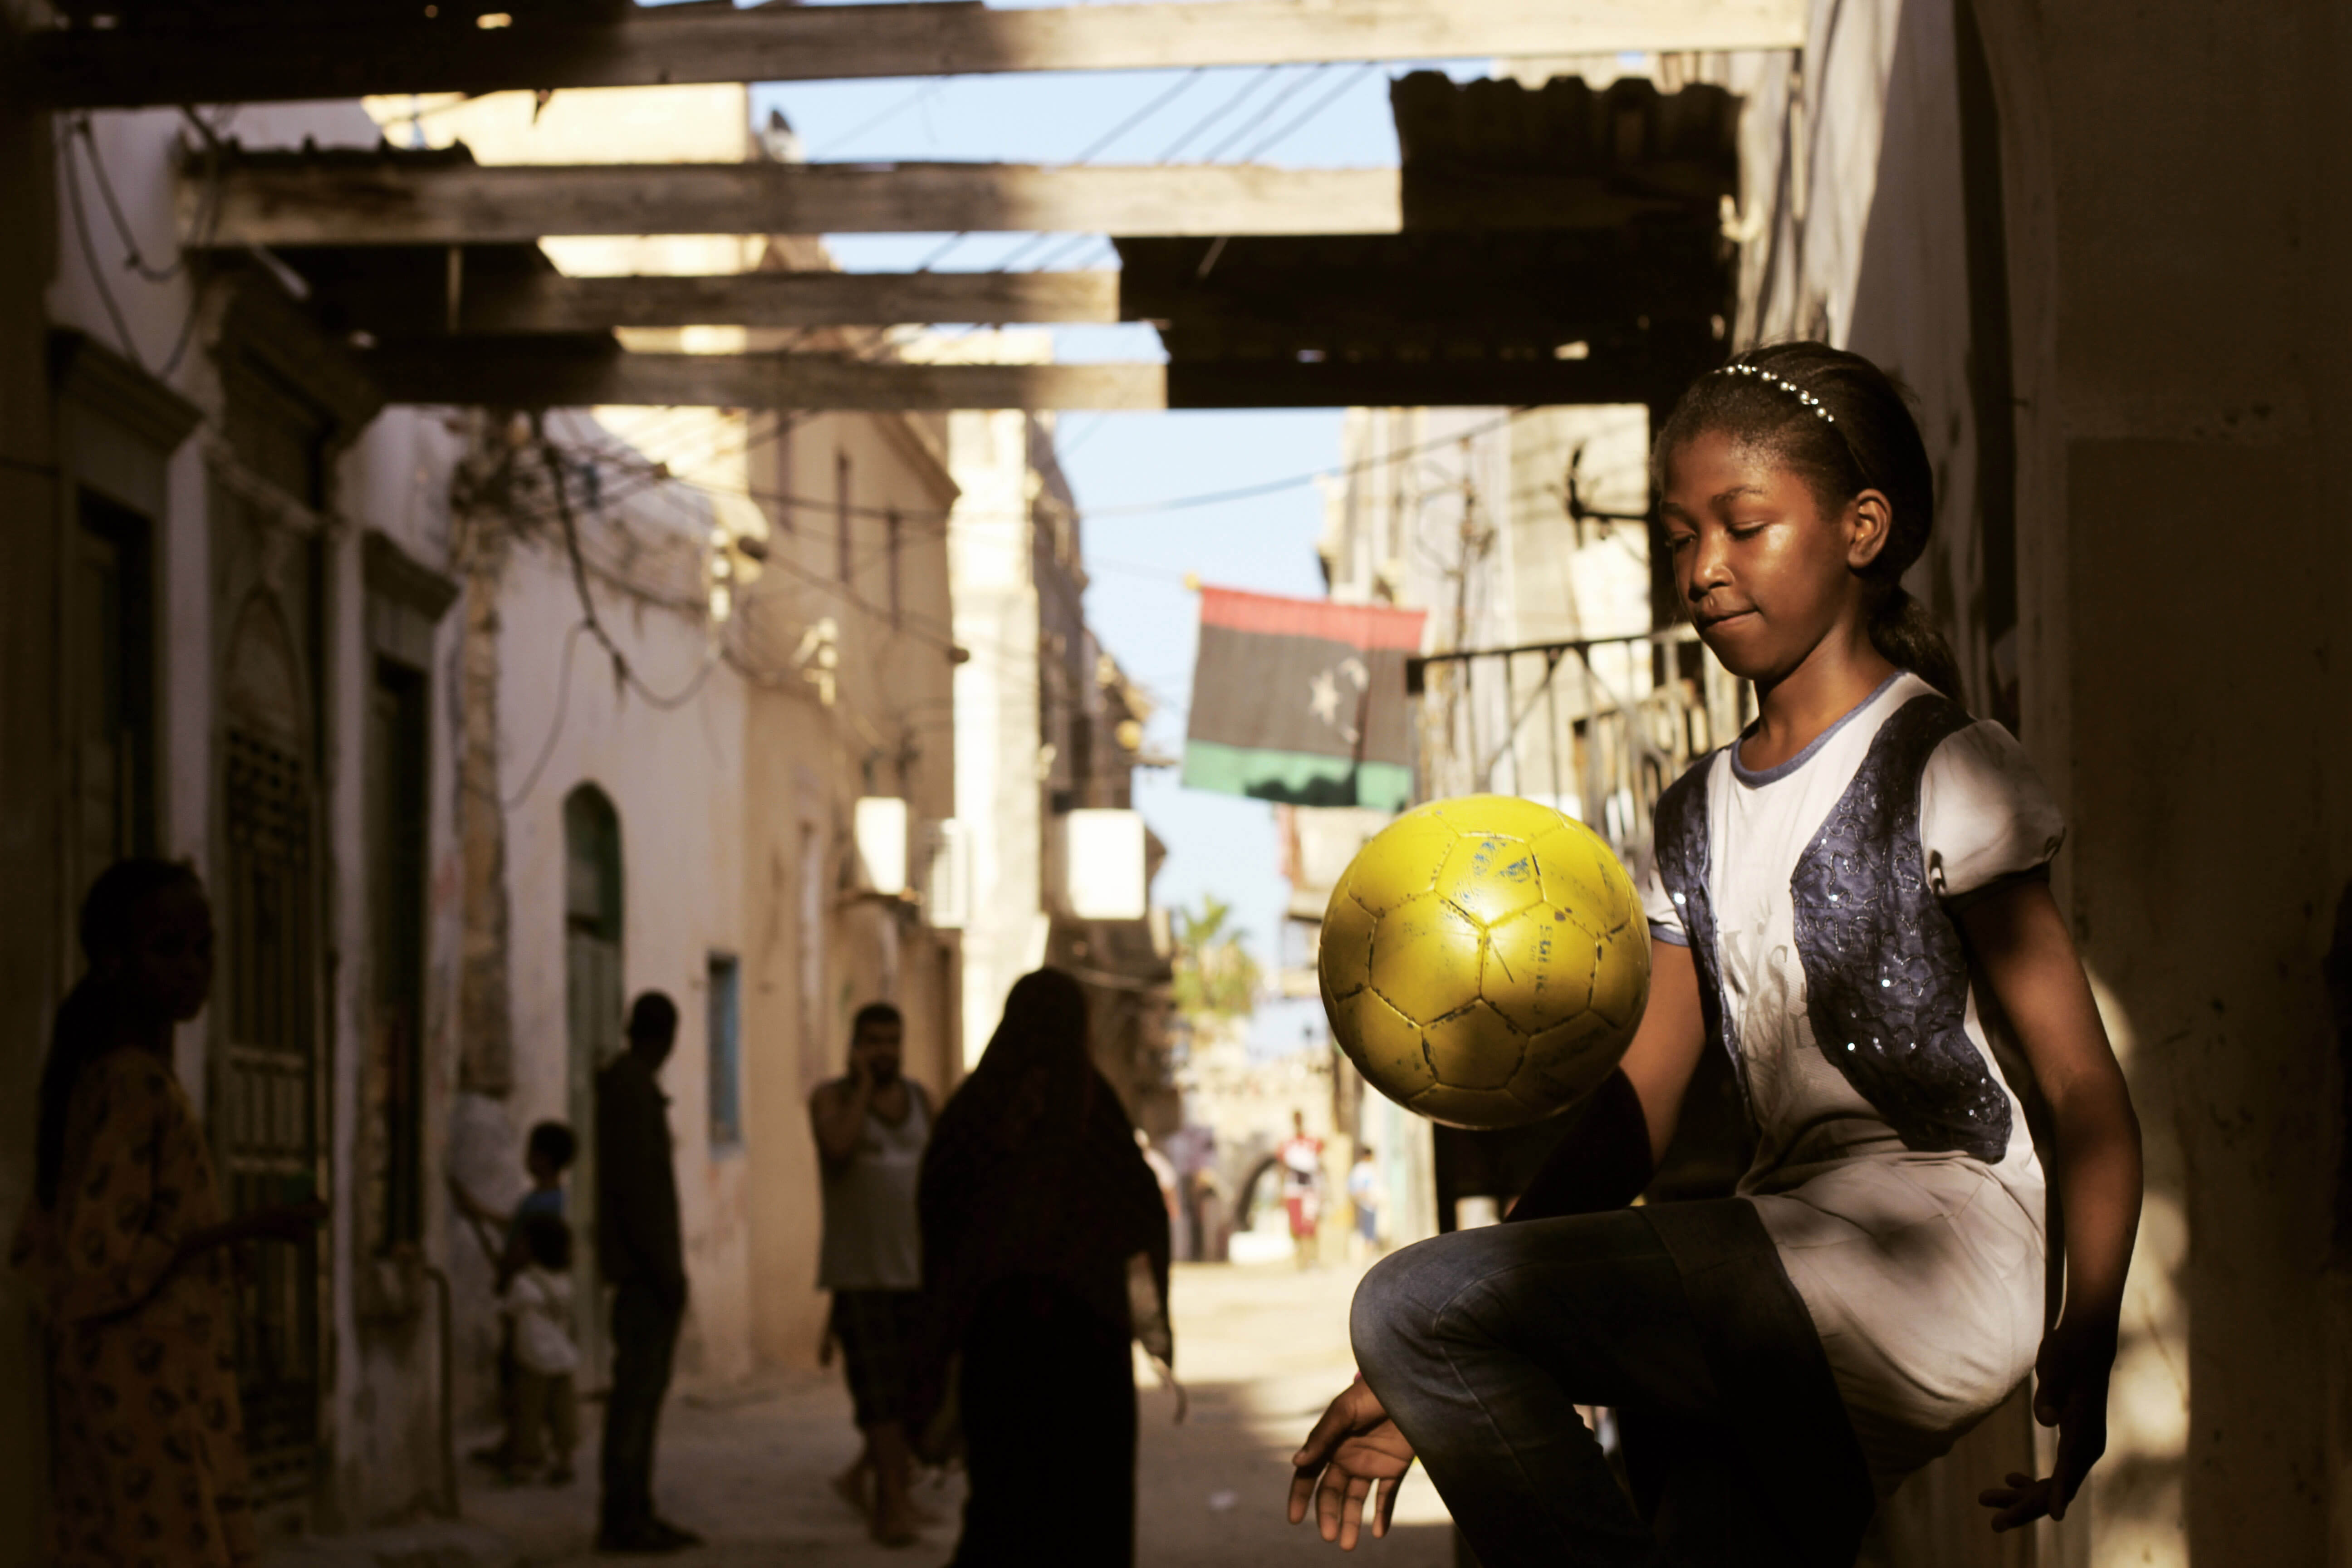 Still from Freedom Fields. A girl, illuminated by the sun, is bouncing a yellow soccer ball on her knee. She is wearing jeans, a white t-shirt, and a sparkly headband and vest. In the background, other people are walking in the street; some looking in the direction of the girl. The Libyan flag is illuminated above a doorway.